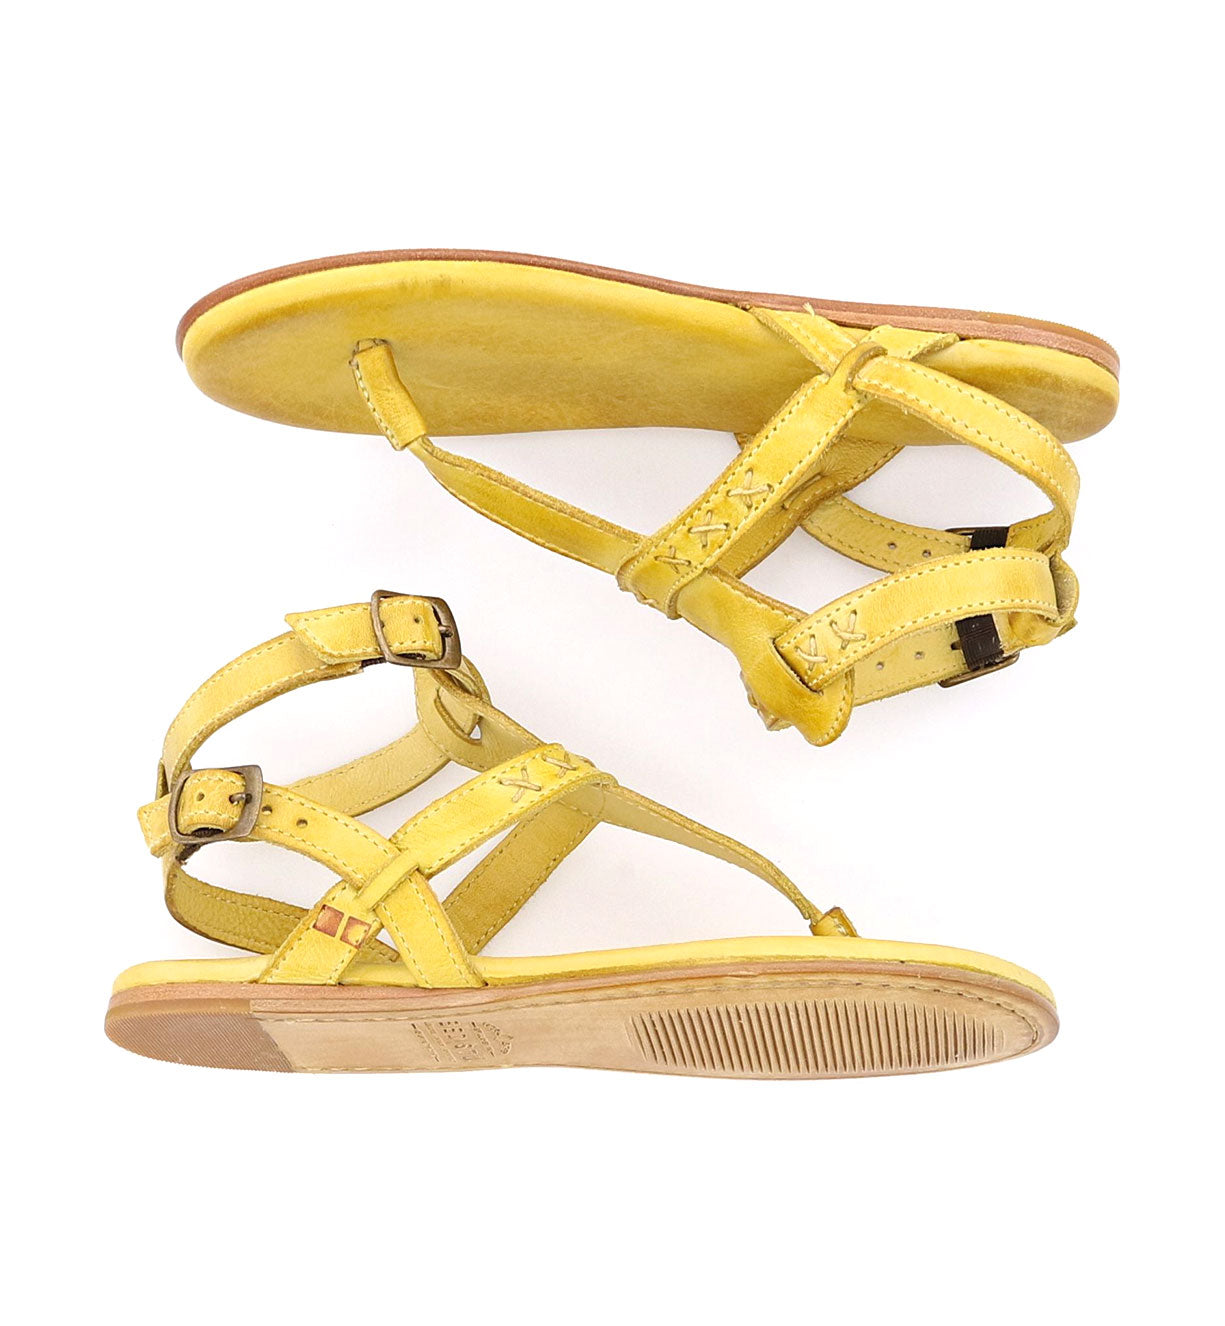 A pair of yellow Moon sandals on a white background. (Brand: Bed Stu)